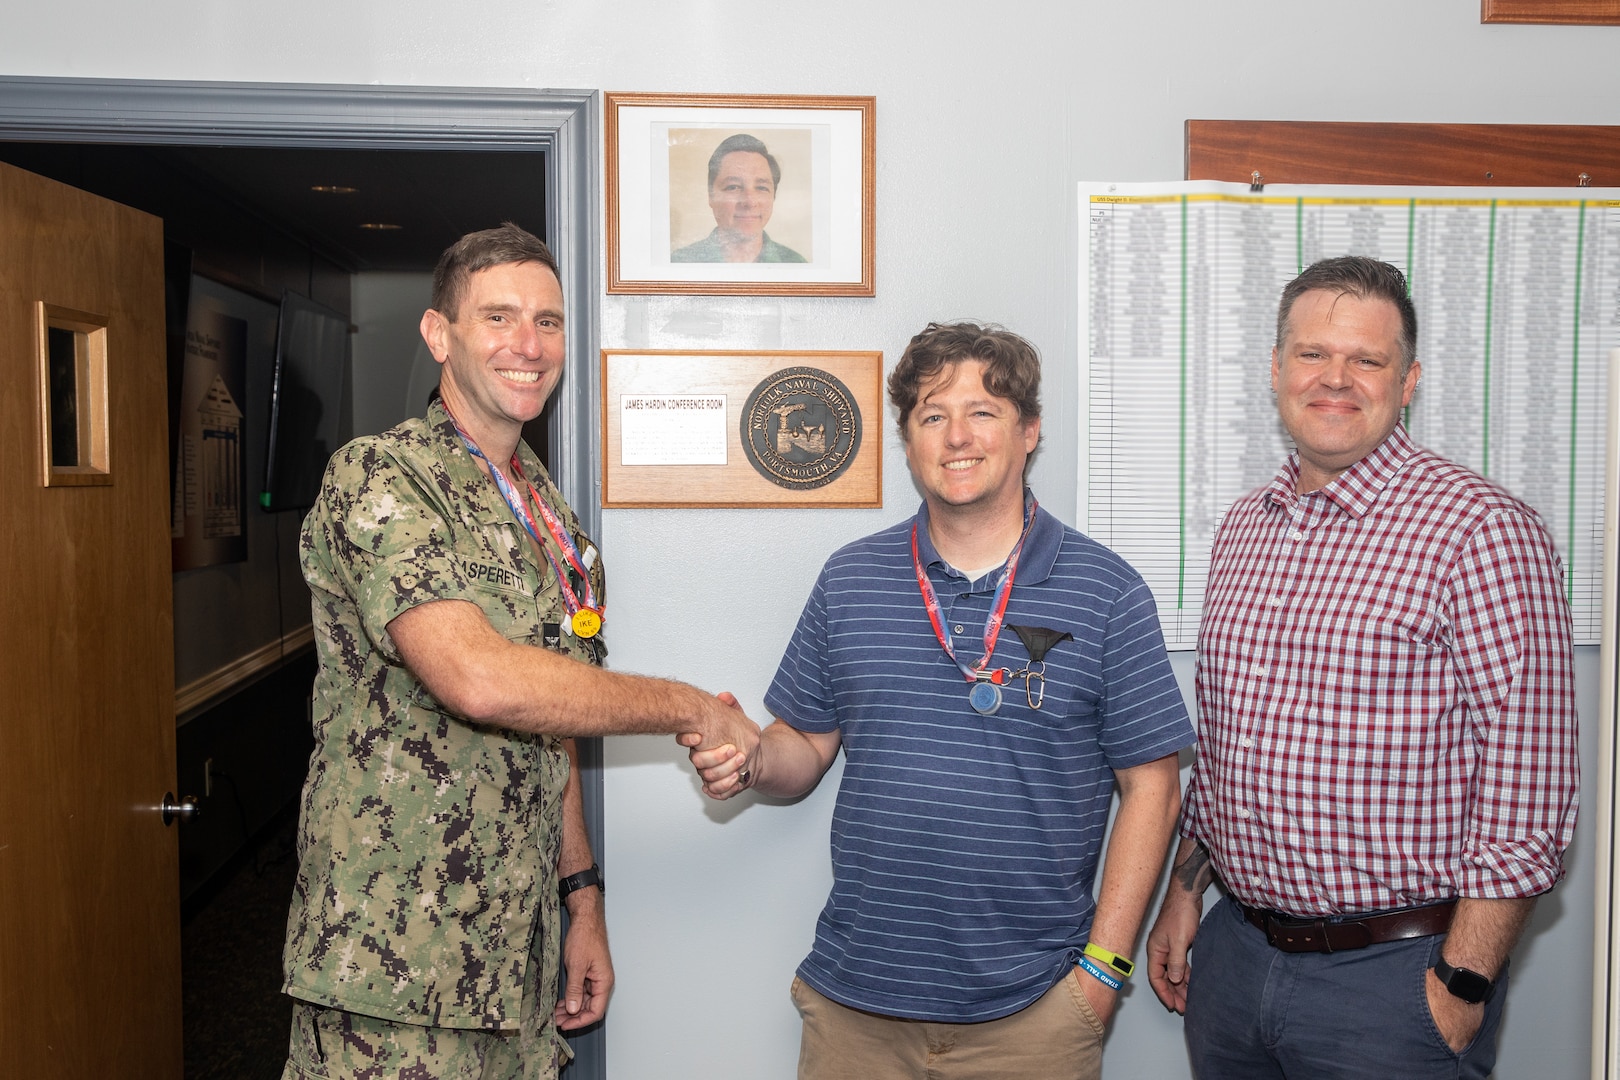 Norfolk Naval Shipyard's Code 900 Production Resource Officer, Capt. Frank Gasperetti, congratulated Mr. James Hardin from the Production Resource Office (Code 900), Outside Machine Shop (Shop 38), for receiving the honor to have the Production Resource Office conference room named after him for the month of June 2023 for his leadership skills.